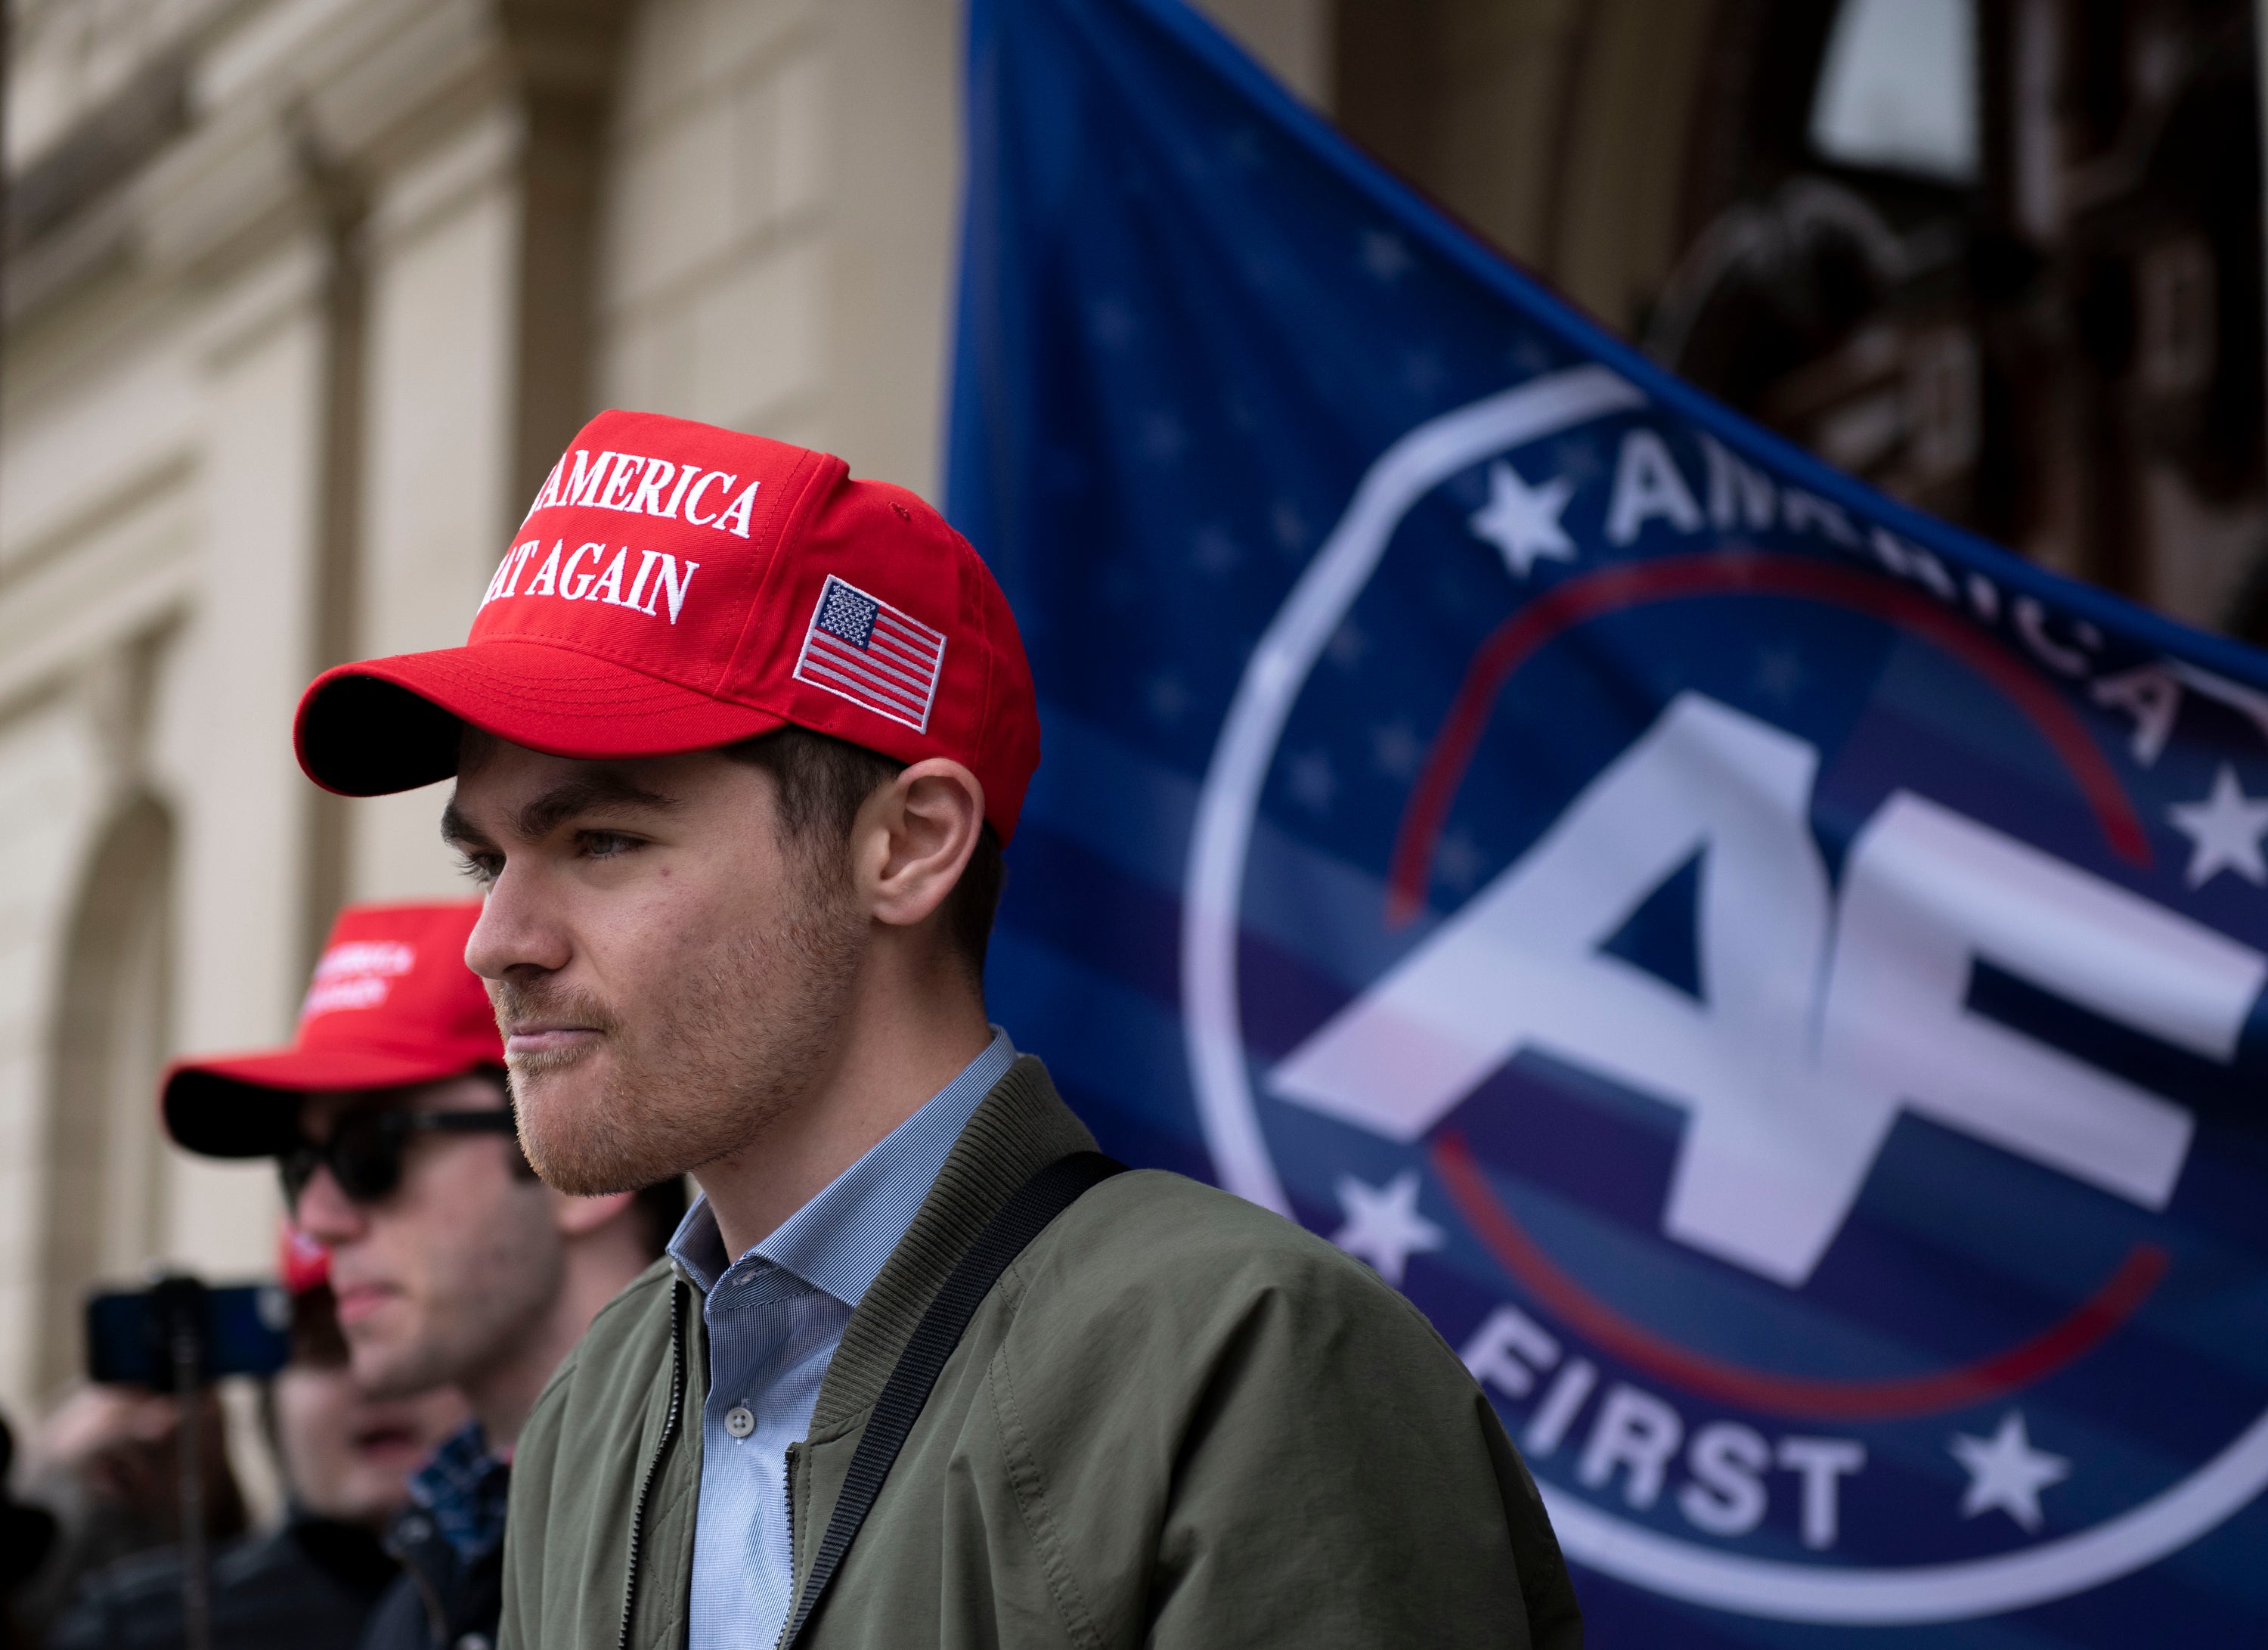 Nick Fuentes held Nov 11 2020 rally in Michigan where he backed Trump’s false claims about election results